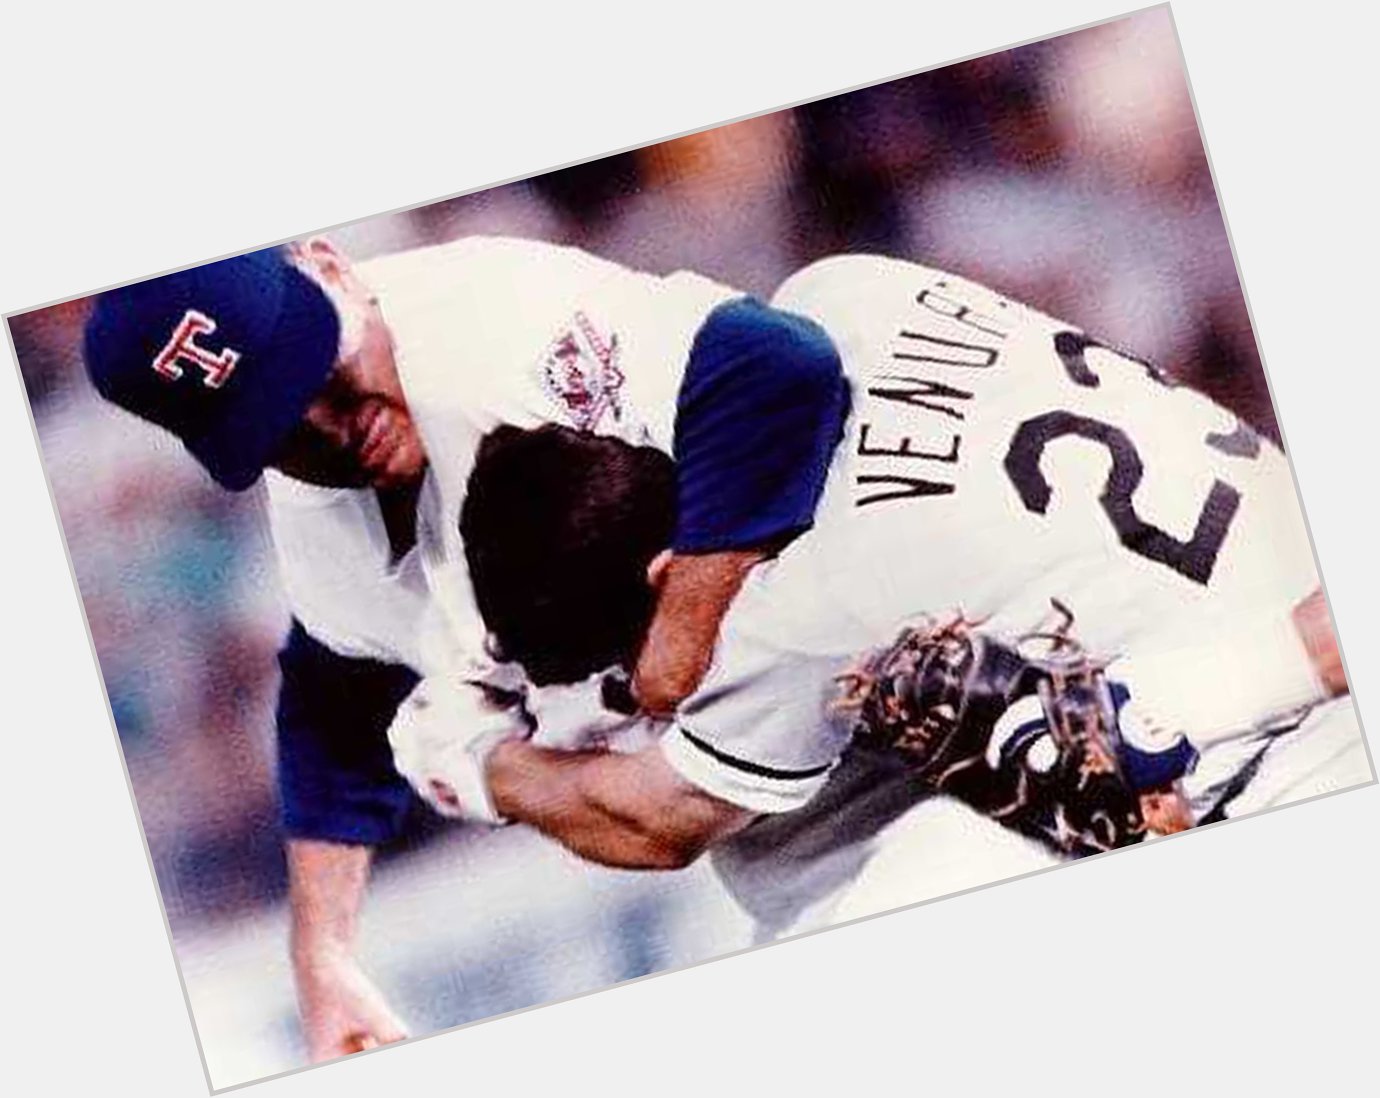 Happy Bday to Robin Ventura!
Little Known Fact- His face was a conveniently shaped handrest for Nolan Ryan\s fist 